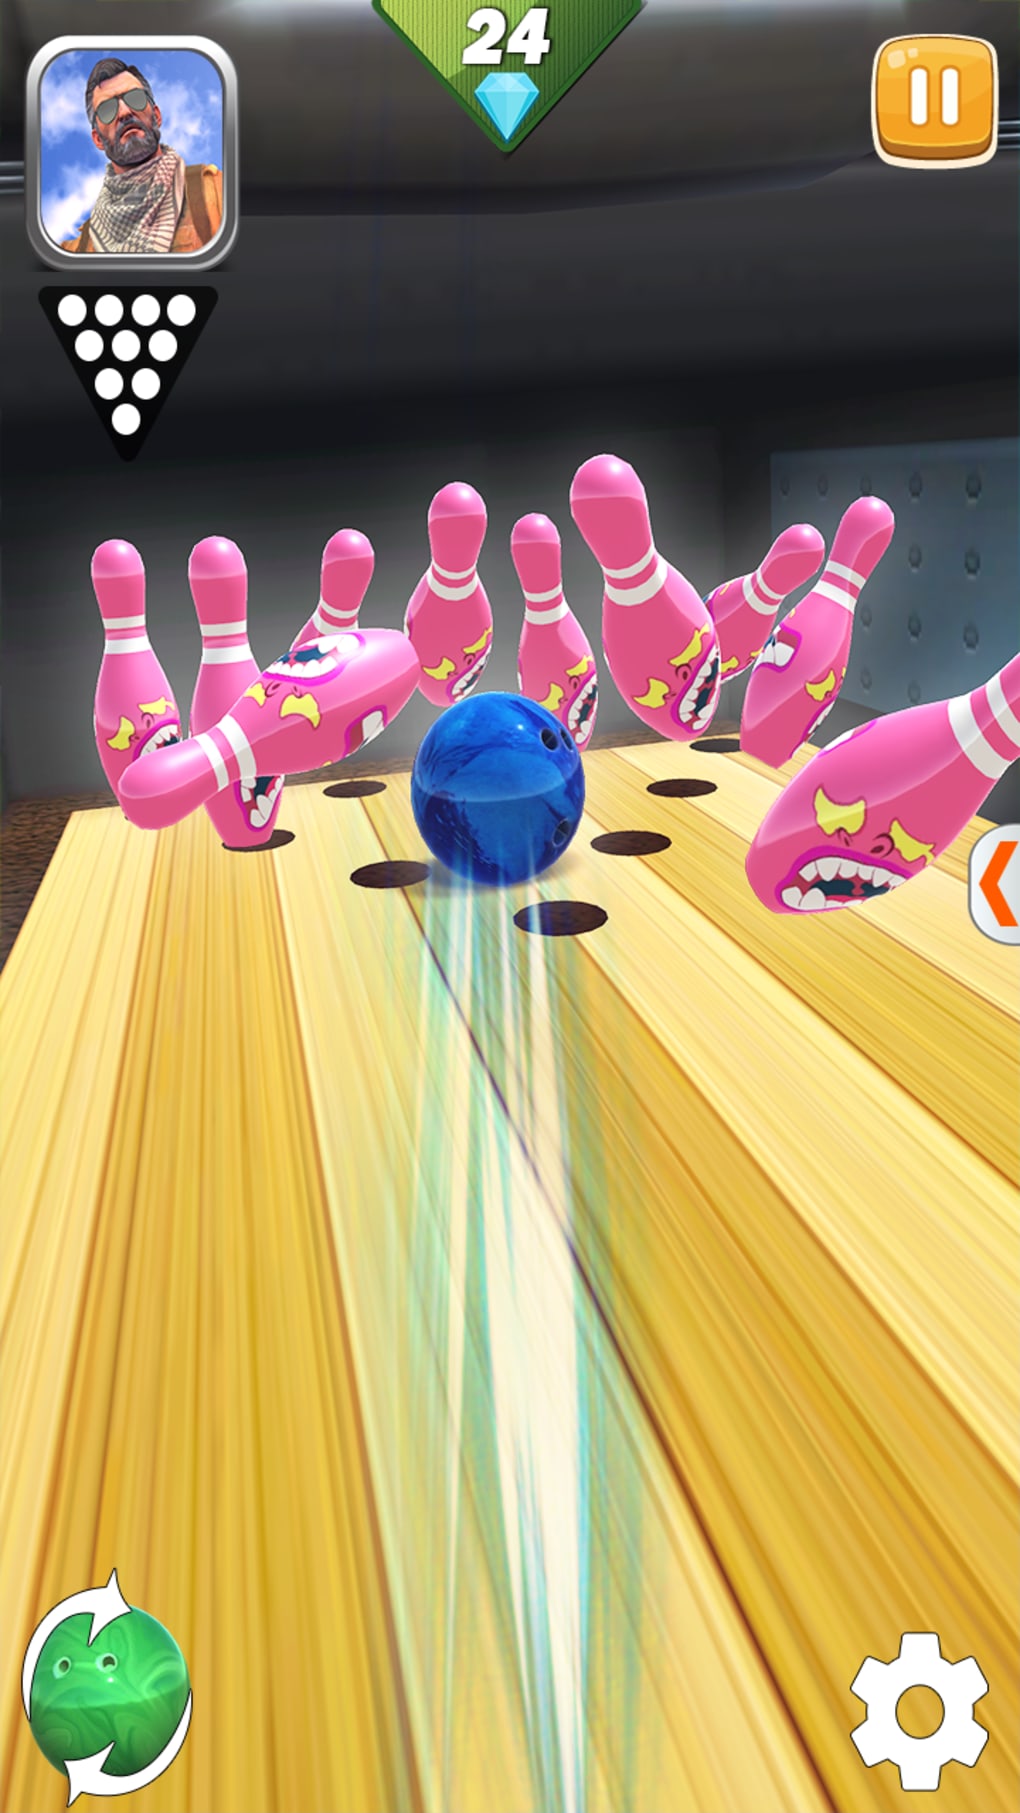 Bowling Tournament 2020 - Free 3D Bowling Game APK for Android